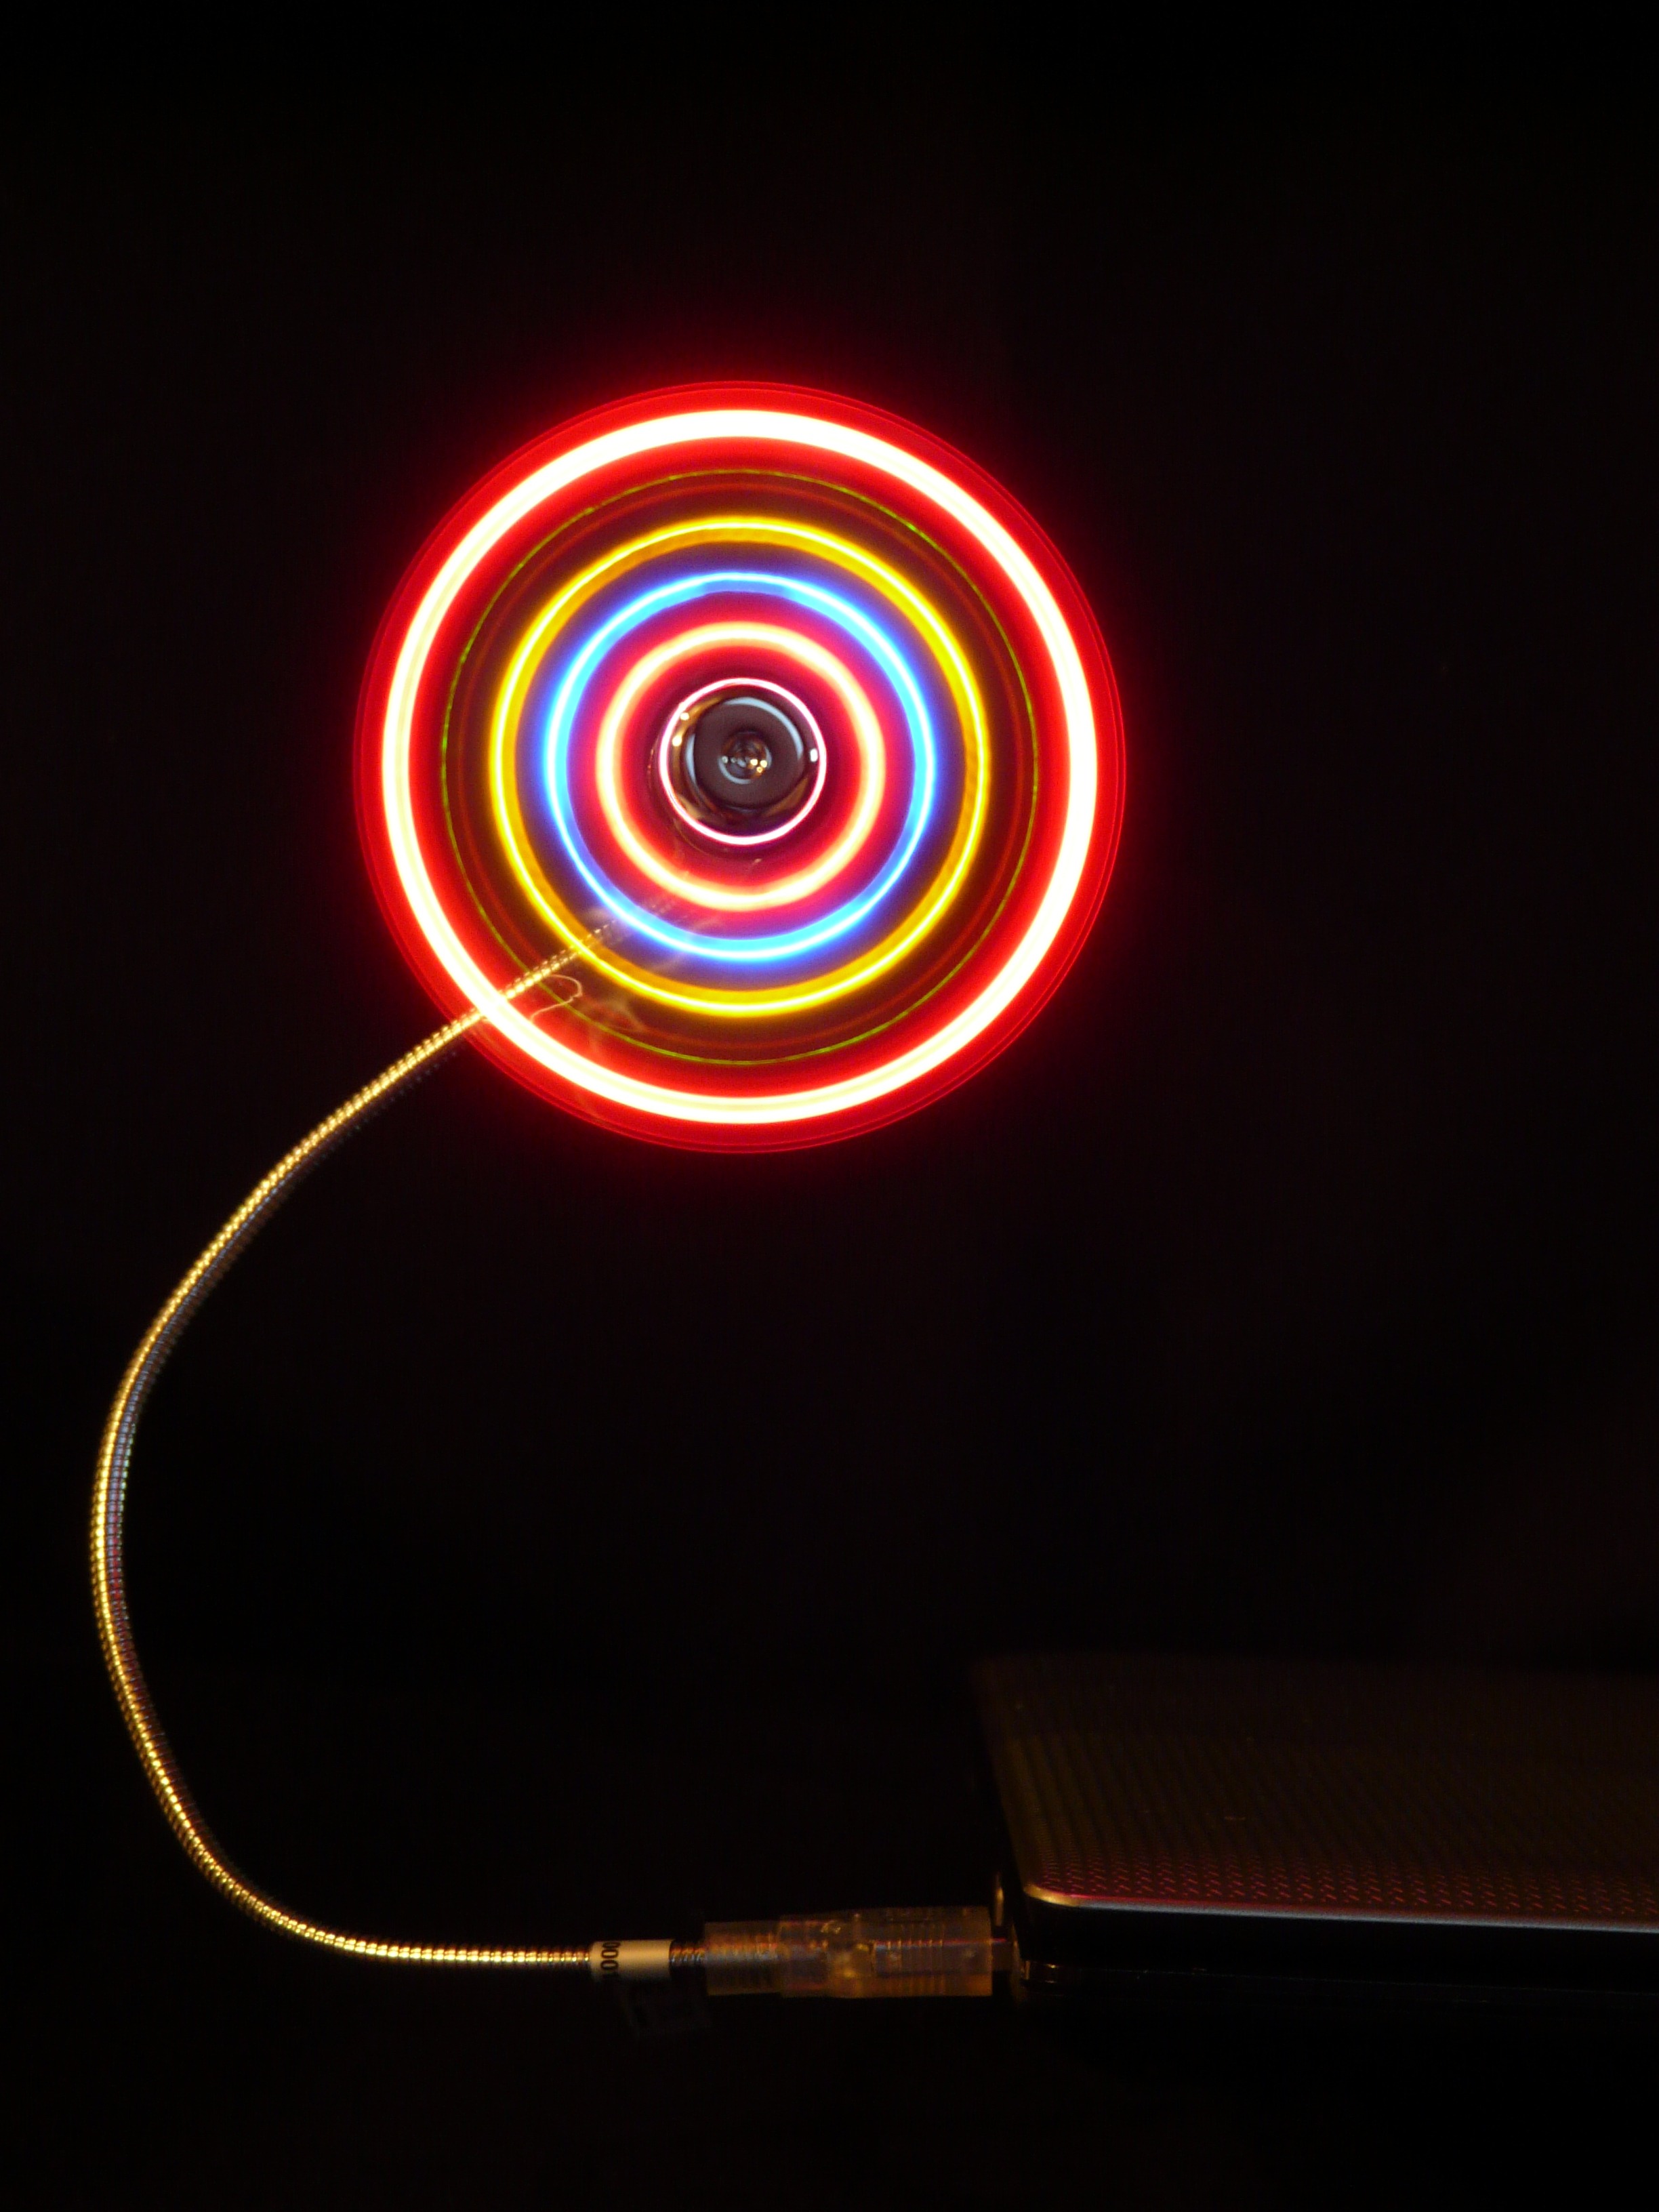 Free Image, light, night, air, spiral, number, mystical, dark, pattern, red, color, glow, darkness, colorful, lighting, fan, circle, neon sign, farbenspiel, art, district, mysterious, led, usb, artificial, organ, connection, shape, cooling